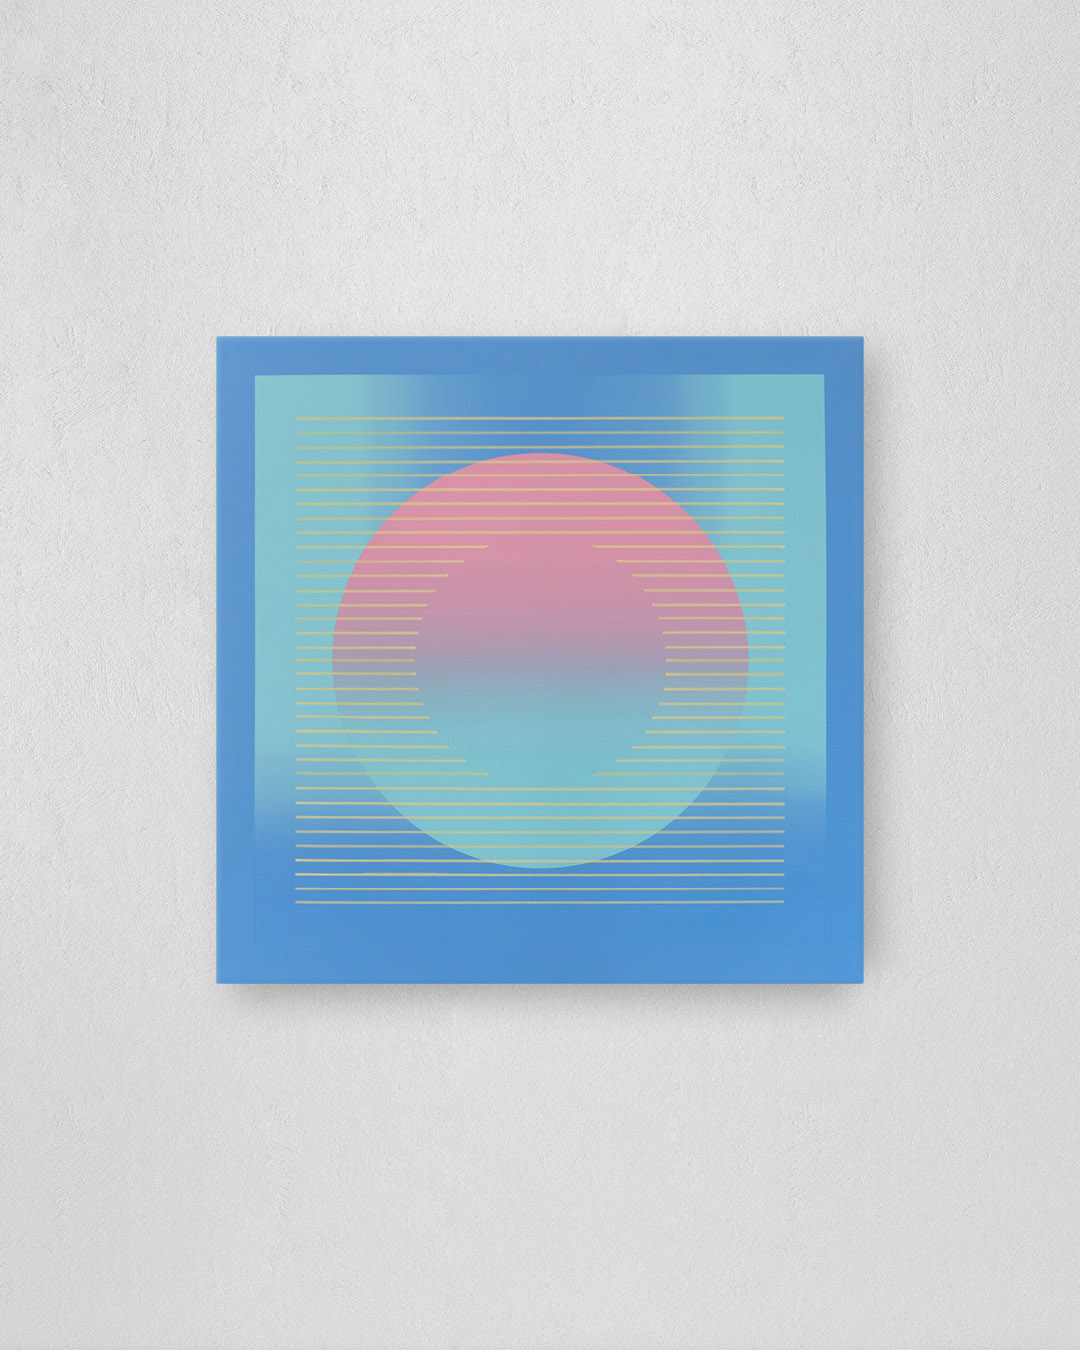 Circle with gradient and parallel lines, completed in 2019 with acrylic paints and markers on a 80 x 80 cm canvas with colour-matched floater frame.